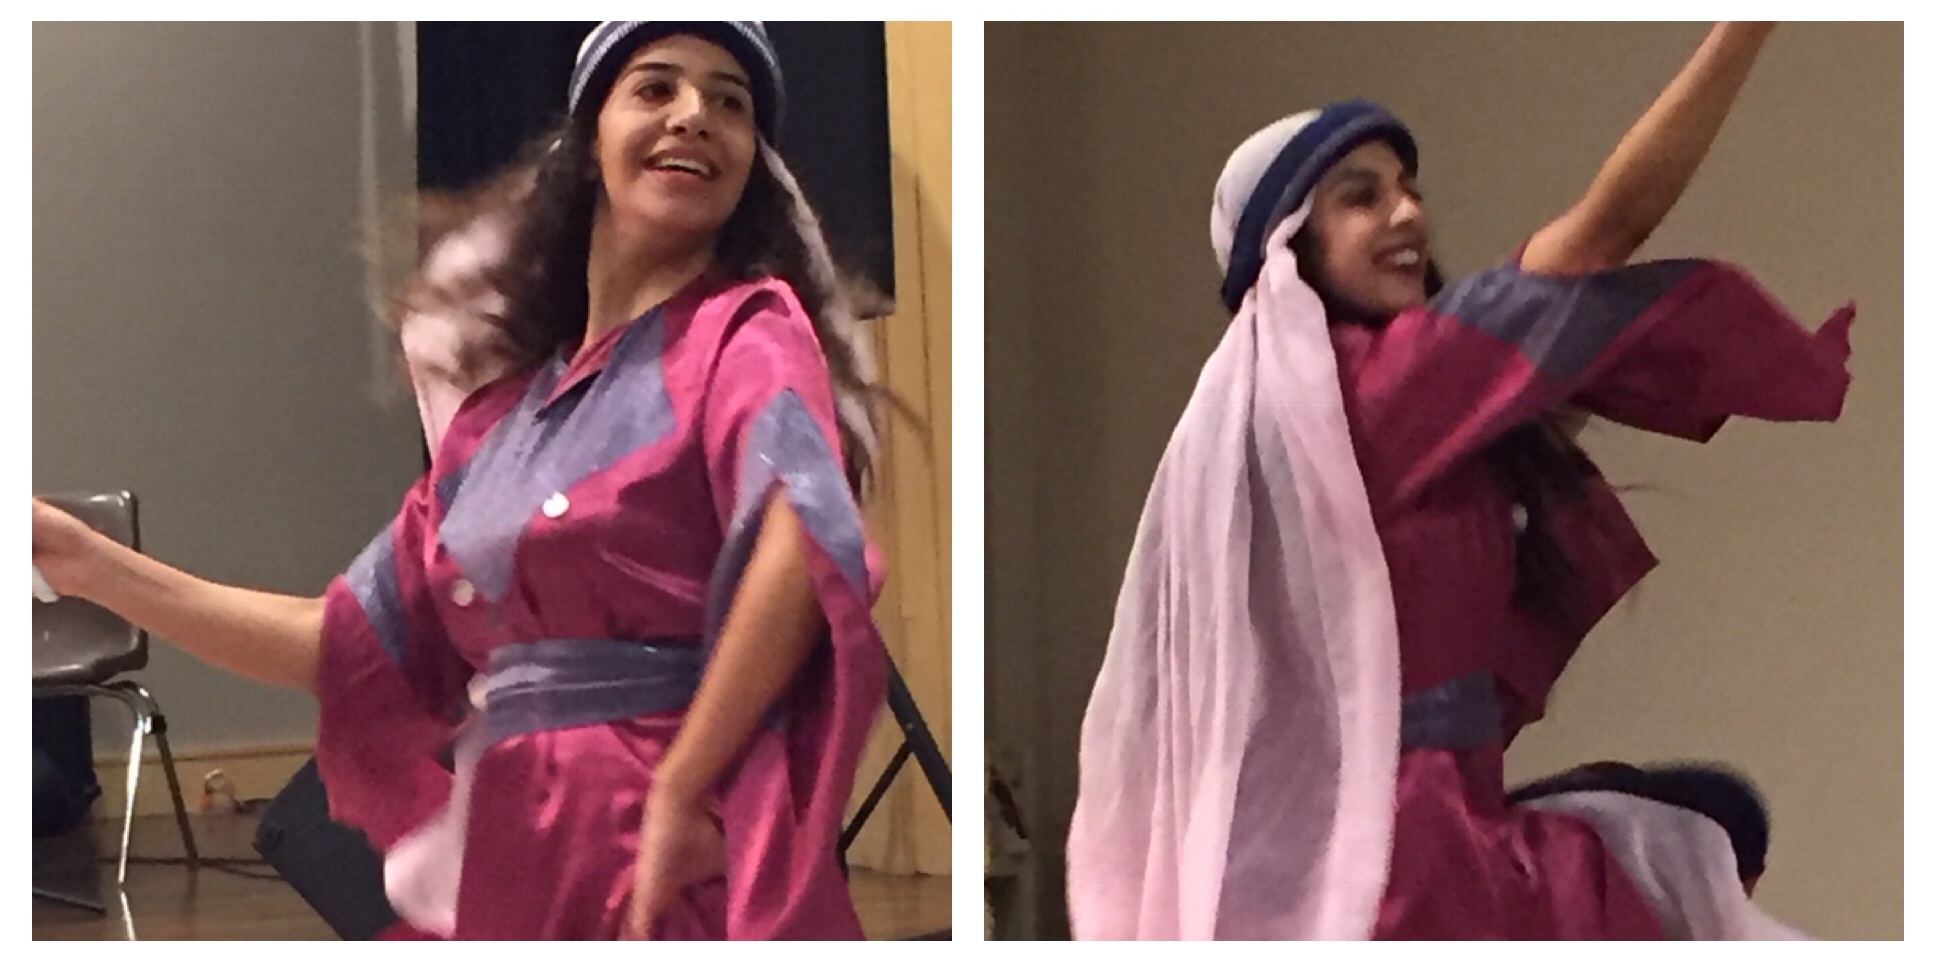 The Diyar dance troupe from Bethlehem treated us to traditional and interpretive dance